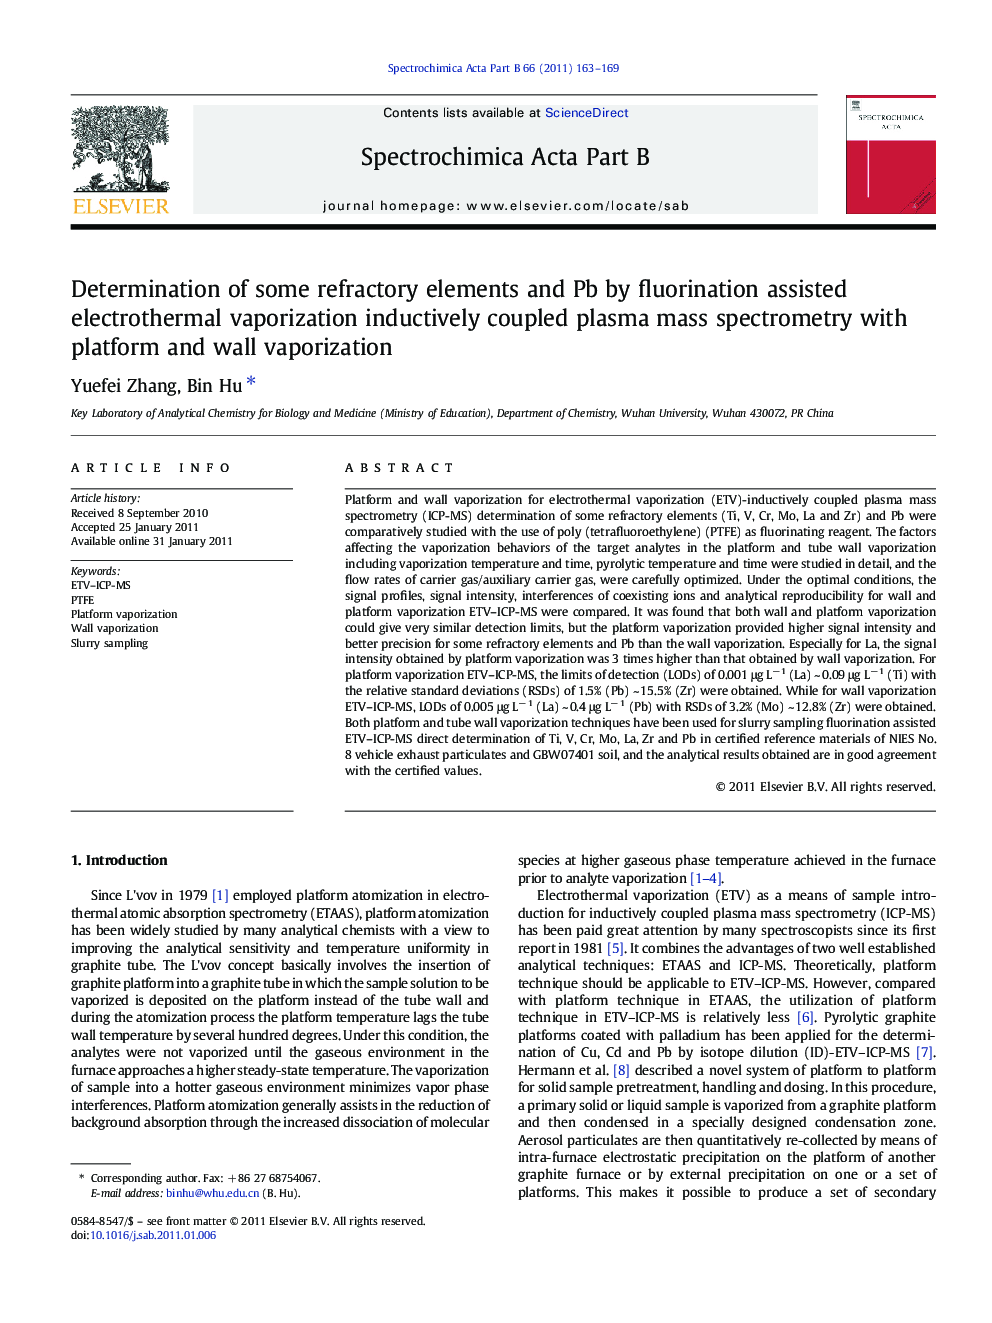 Determination of some refractory elements and Pb by fluorination assisted electrothermal vaporization inductively coupled plasma mass spectrometry with platform and wall vaporization